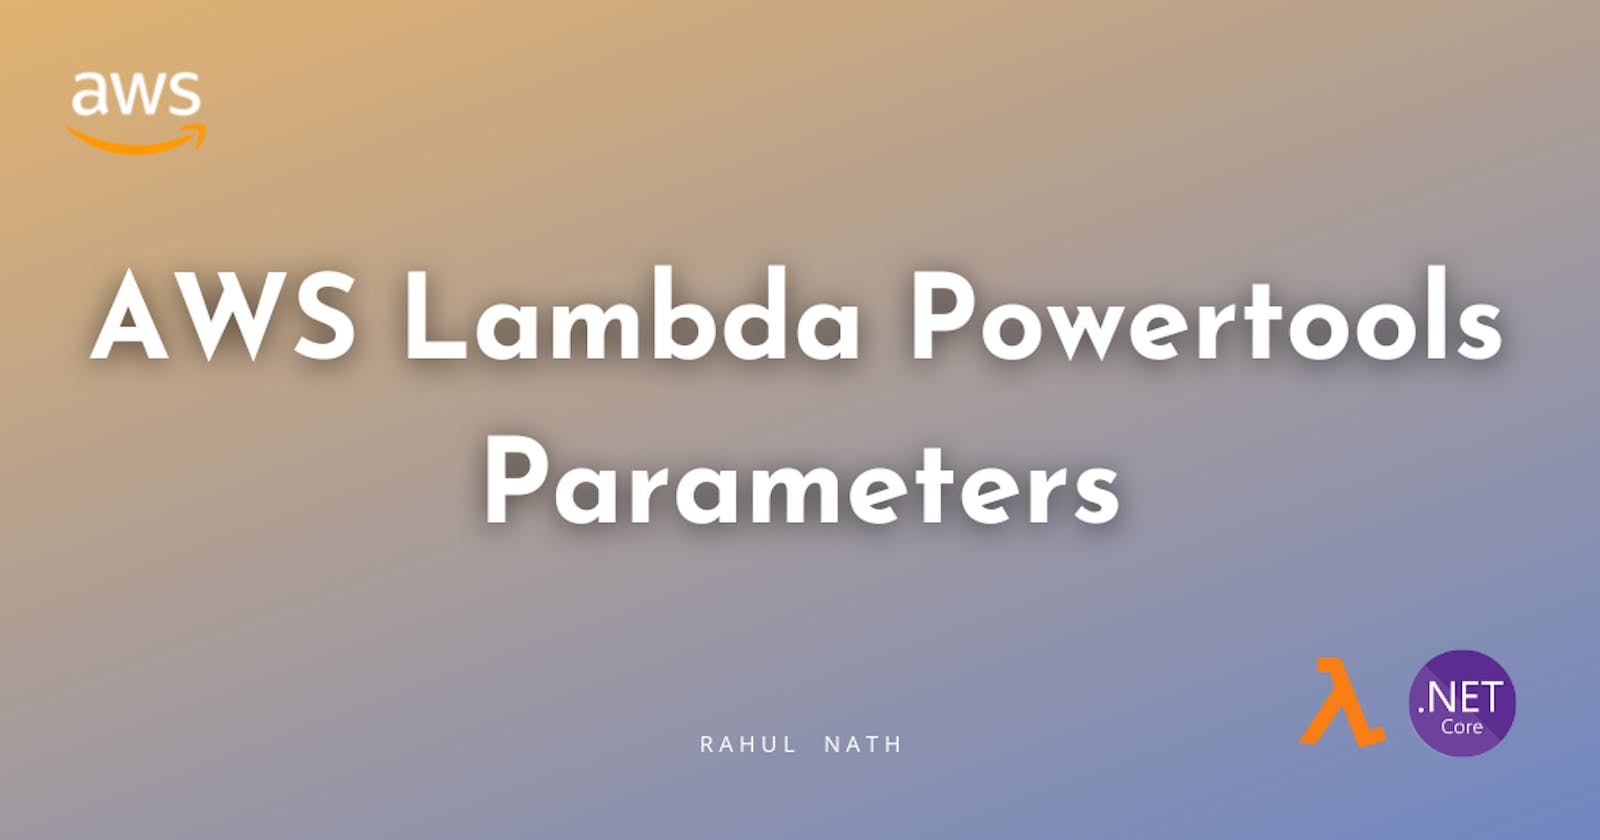 How To Effectively Manage Sensitive Information in AWS Lambda: Powertools Parameters